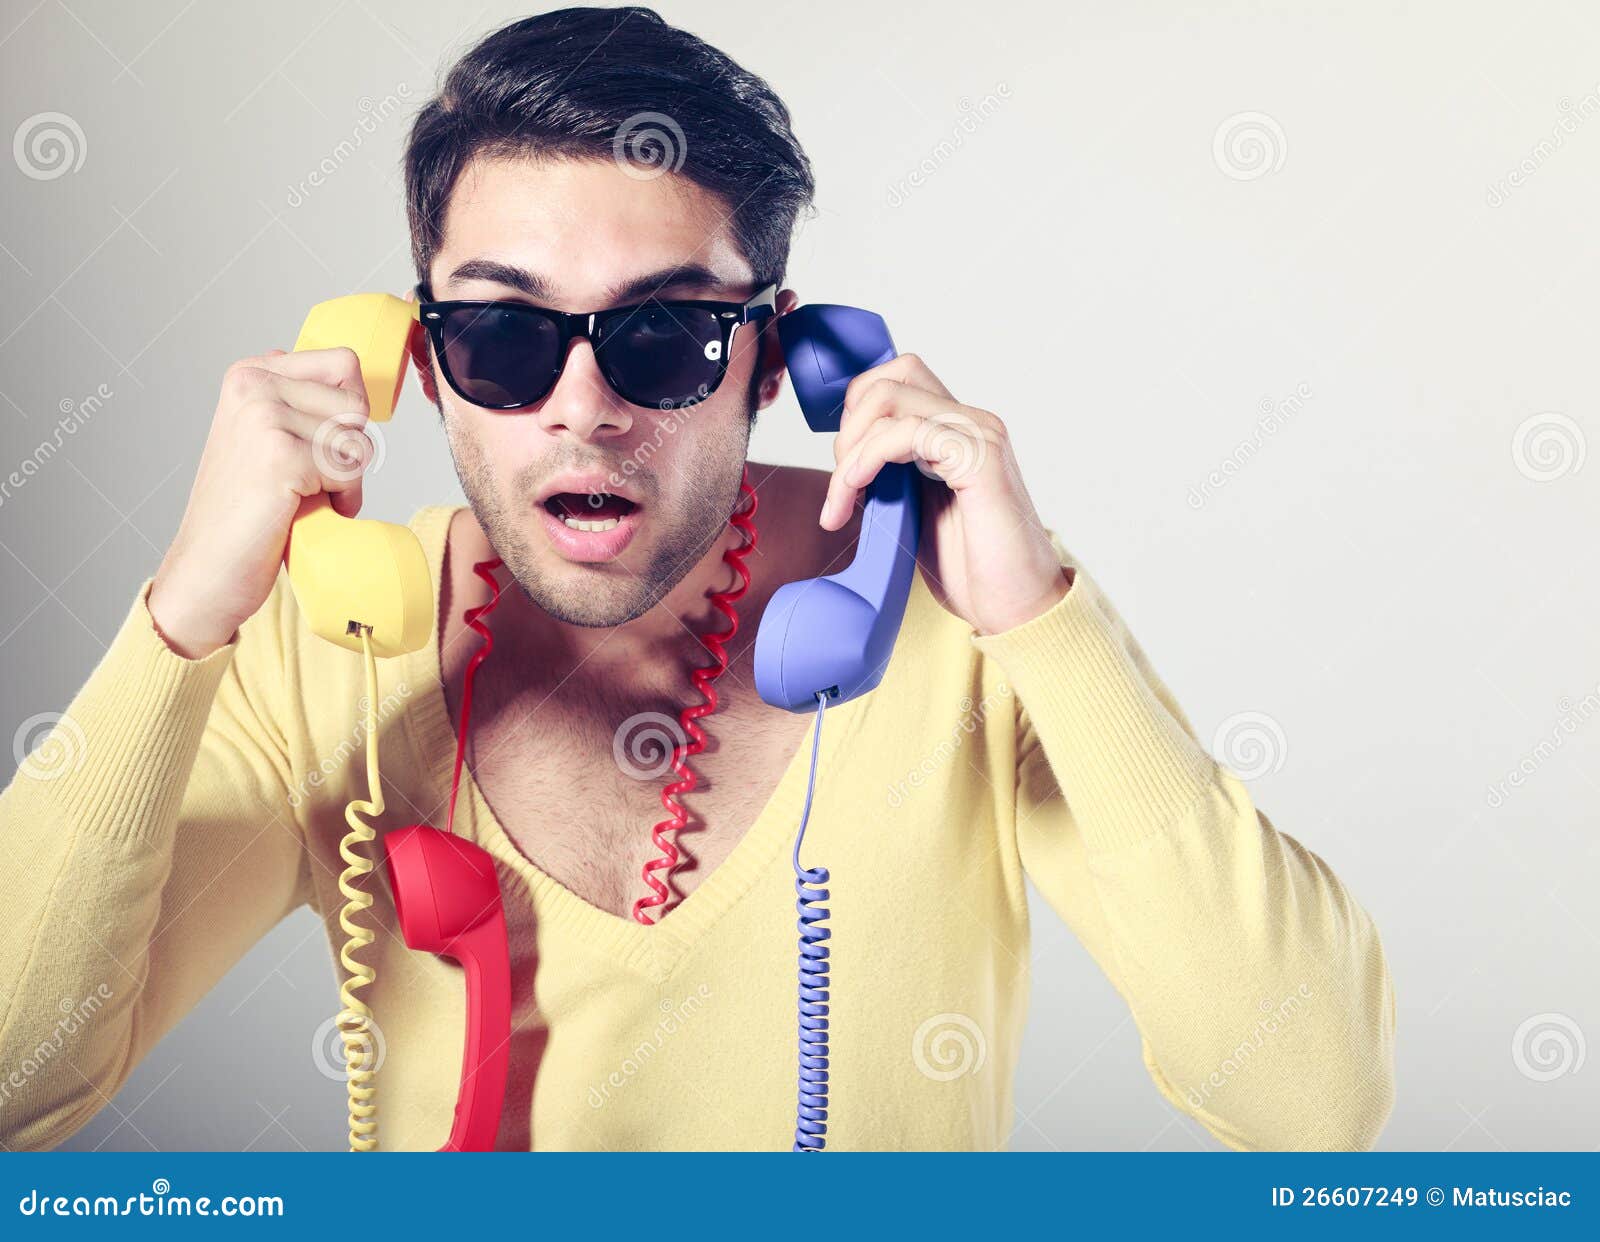 Funny Call Center Guy With Colorful Phones Stock Image Image Of Cool